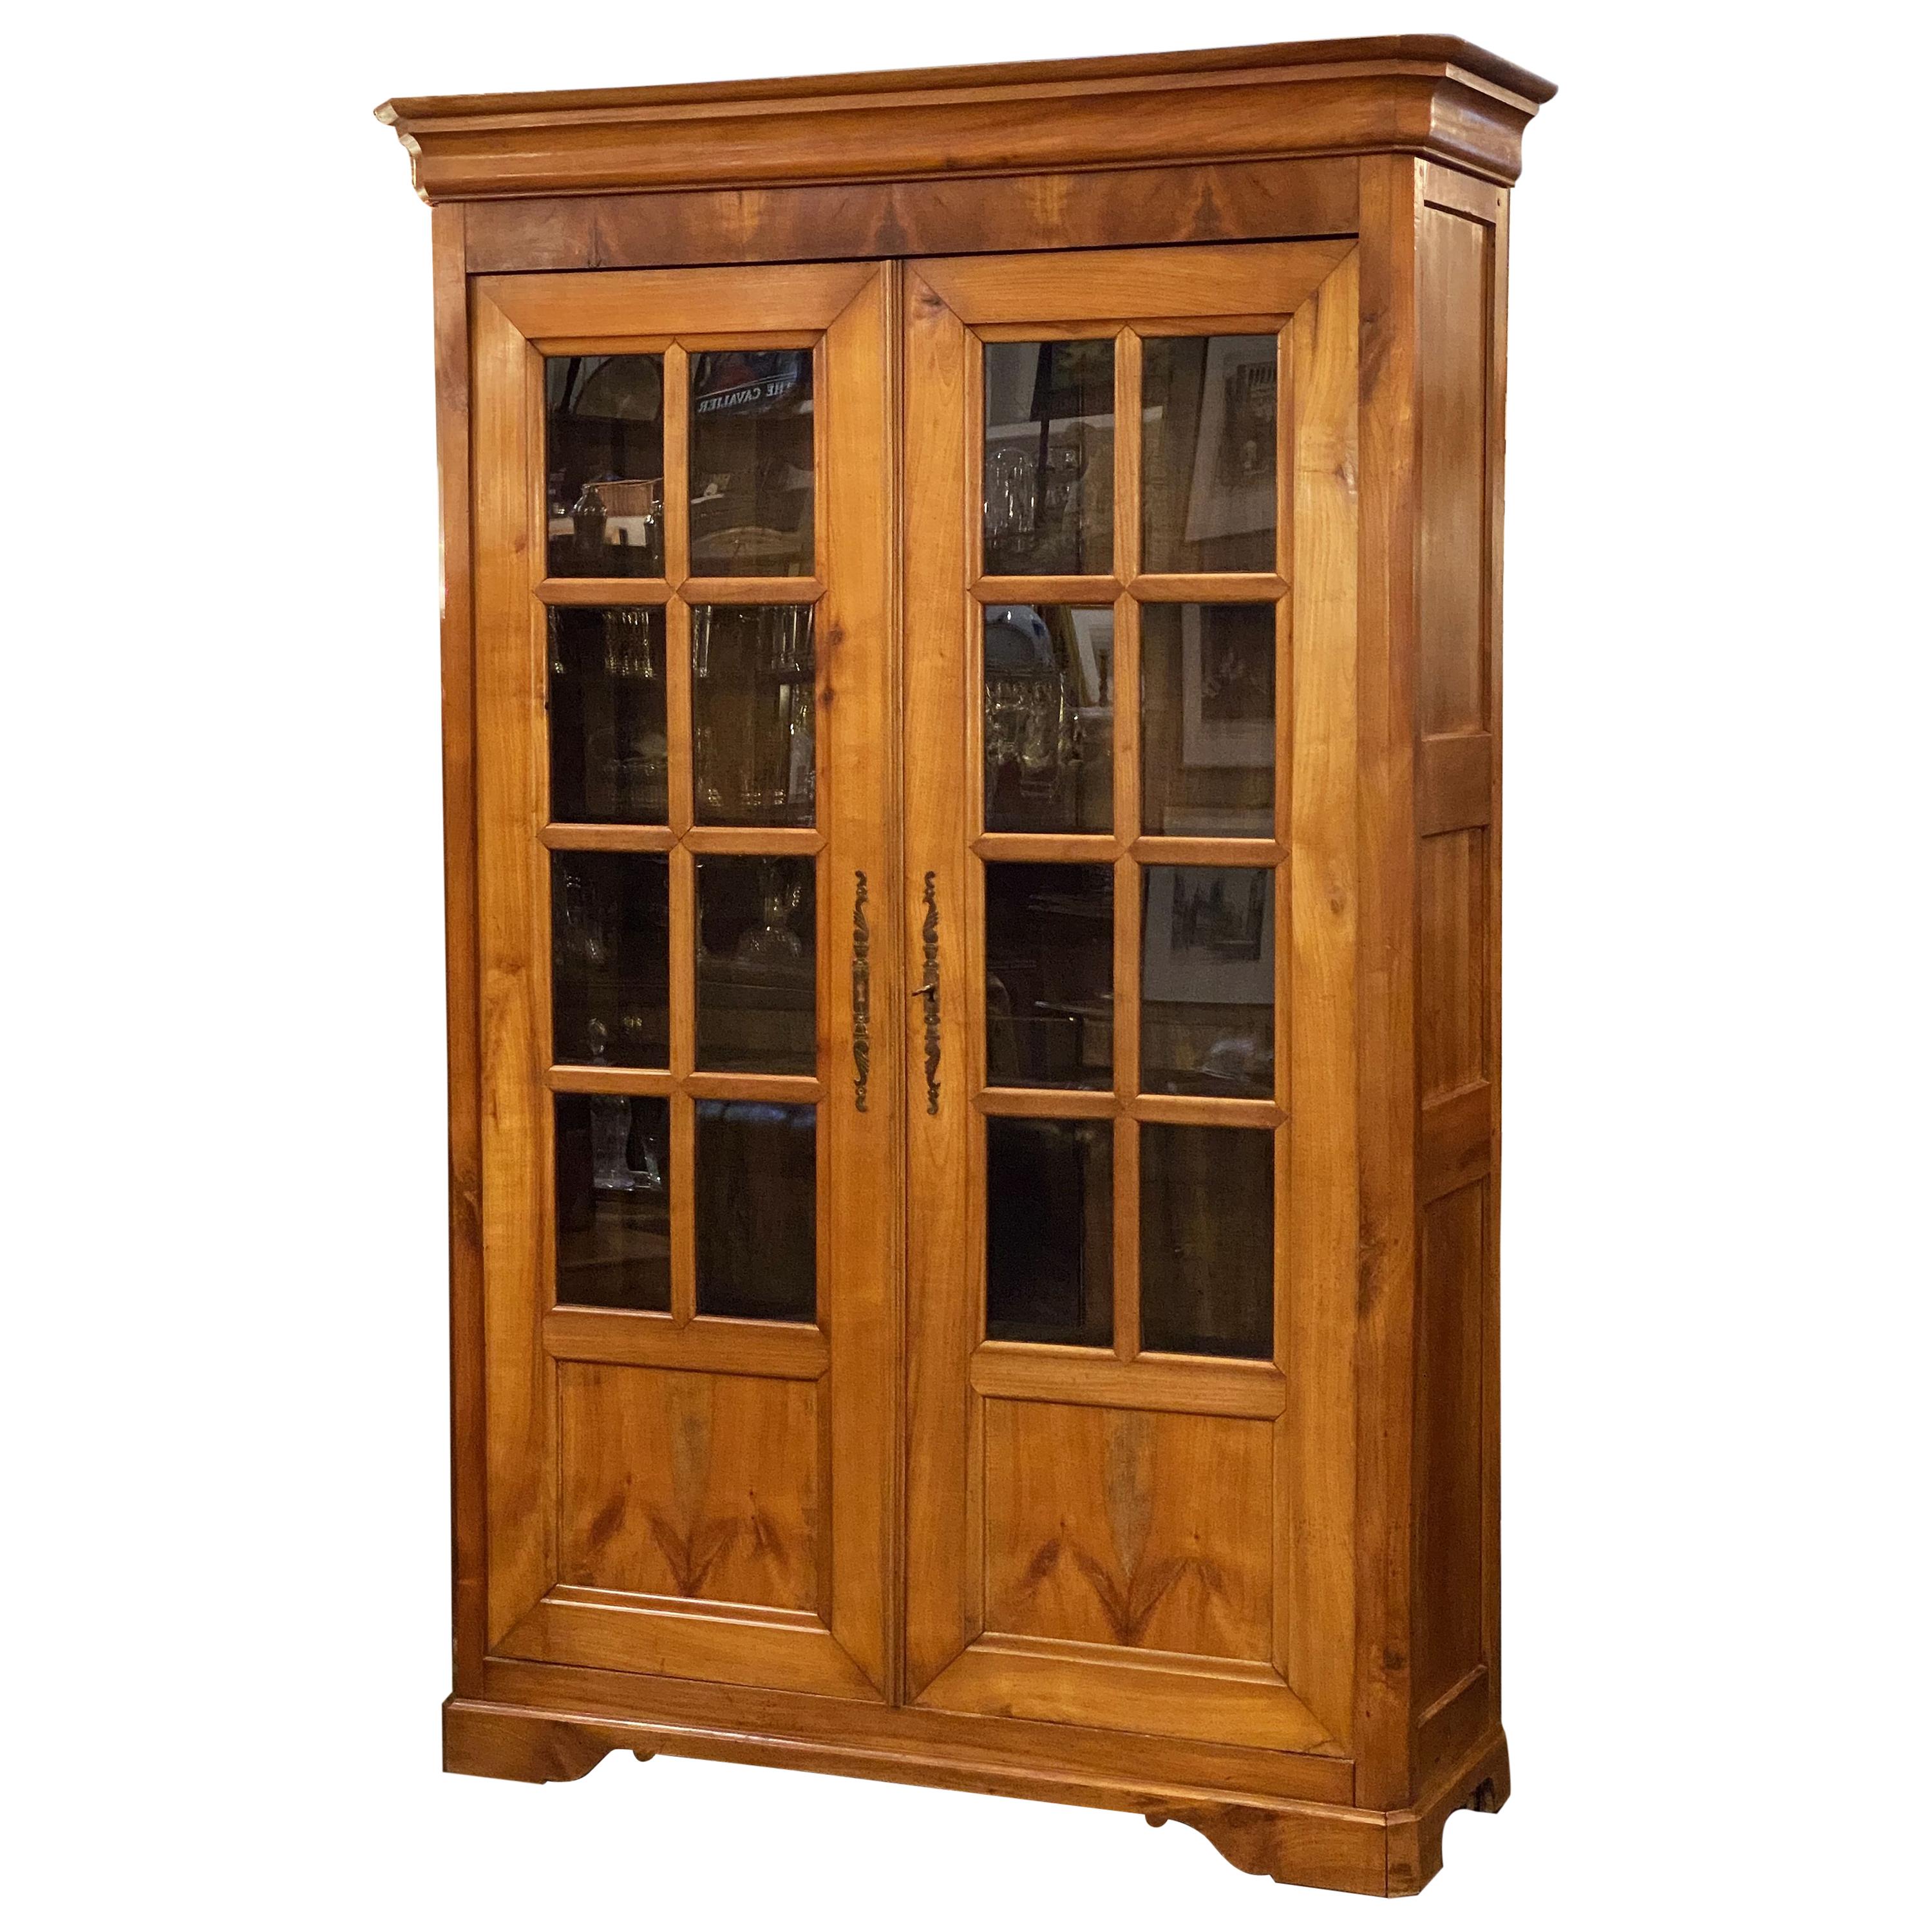 Large French Two-Door Bookcase Cabinet of Cherry